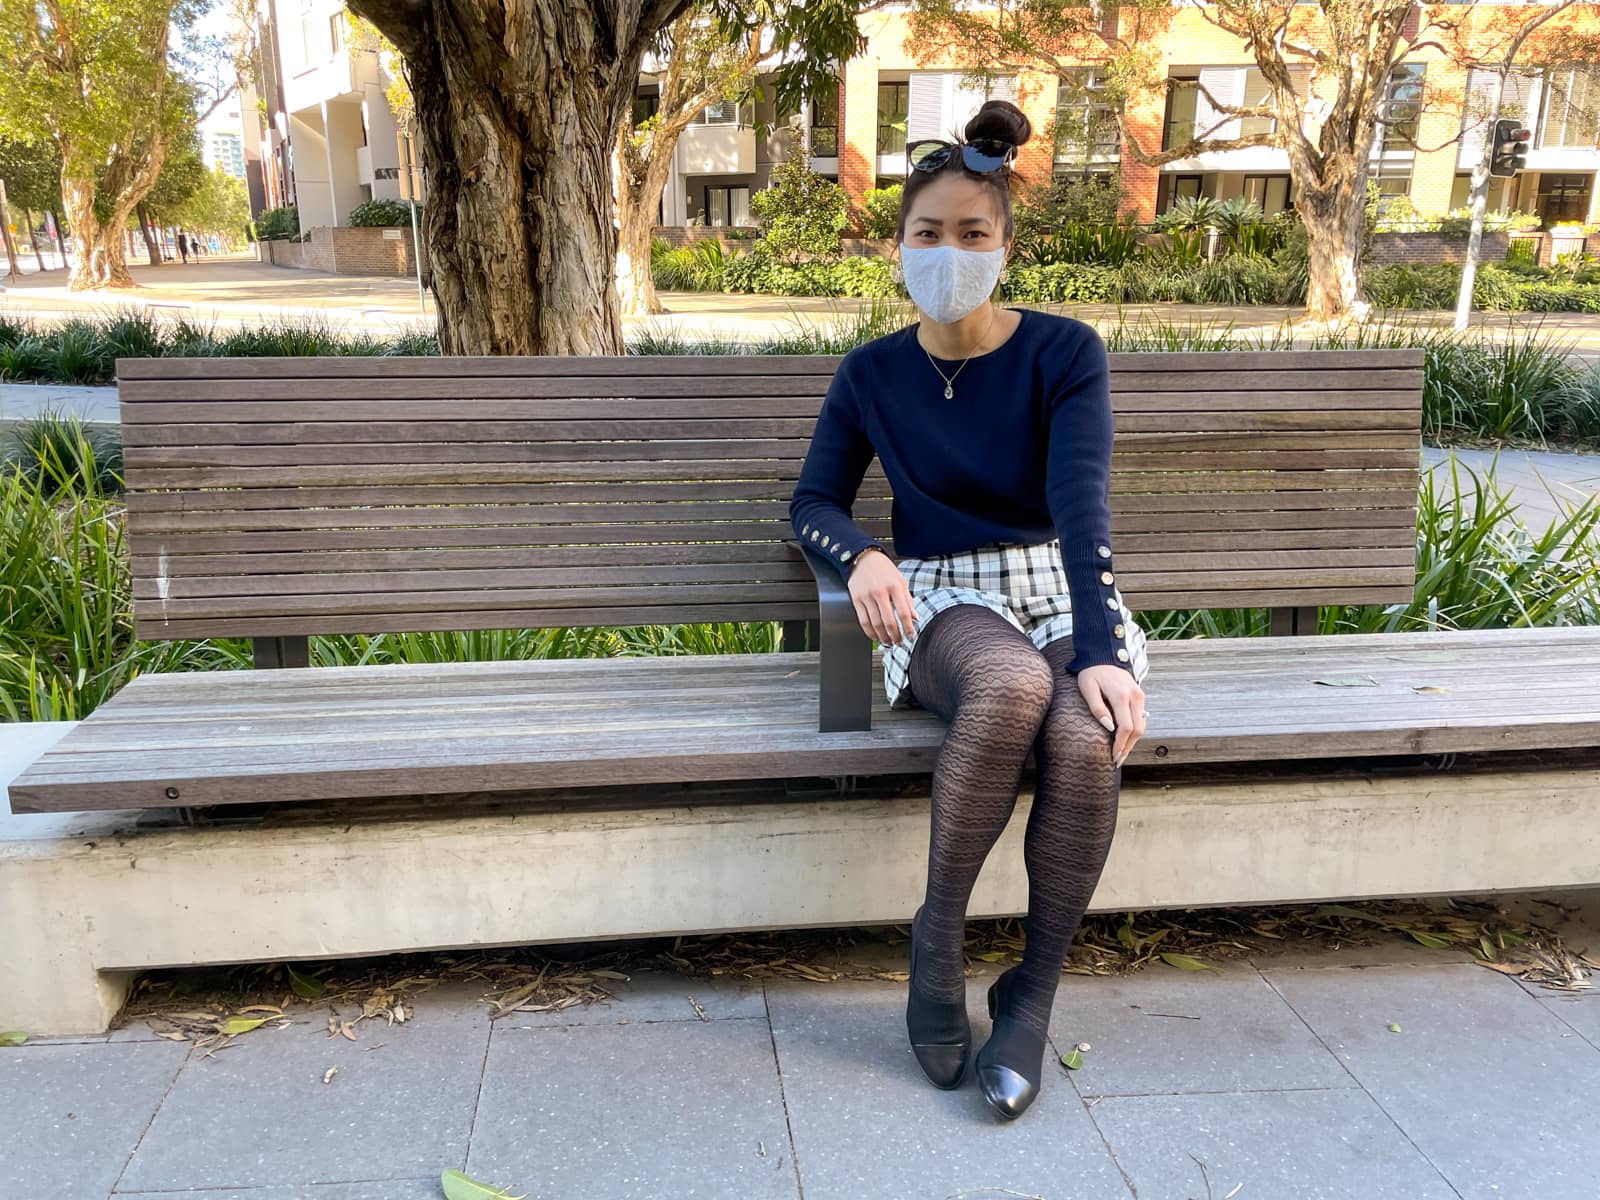 An Asian woman sitting on a wooden bench on a concrete path. She has dark hair tied back in a high bun. She is wearing a navy sweater with button details on the lower part of the sleeves, black and white checkered shorts, lace patterned tights and low profile black loafers. She is wearing a lace face covering over her nose and mouth, and has round sunglasses on top of her head. One of her elbows is resting on an armrest in the middle of the bench.